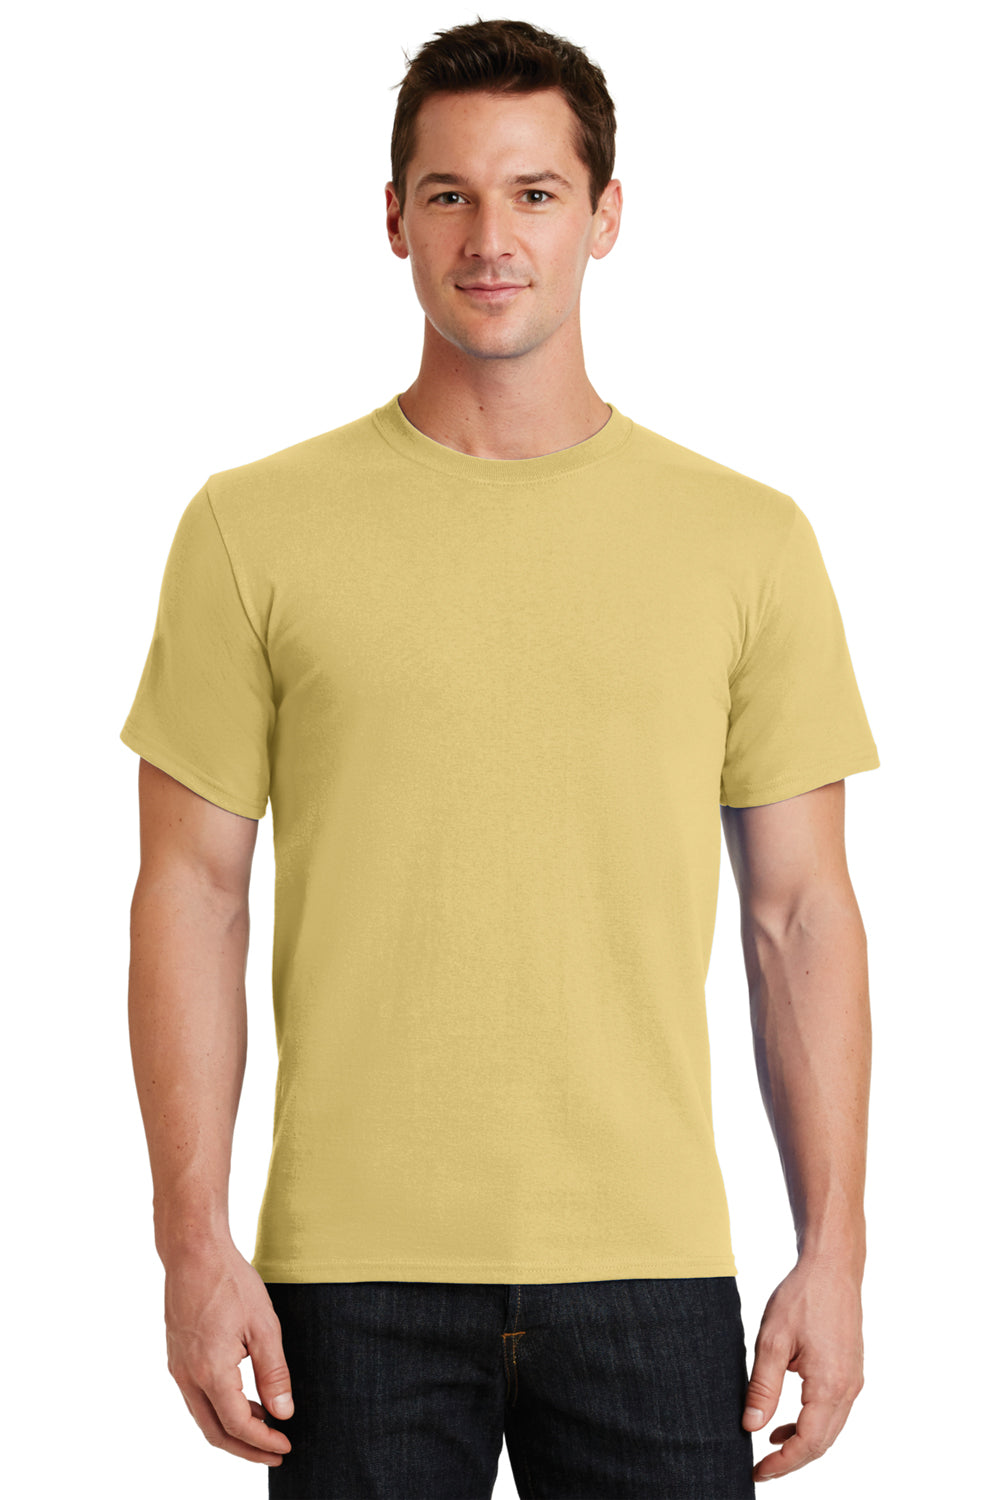 Port & Company PC61 Mens Essential Short Sleeve Crewneck T-Shirt Daffodil Yellow Front